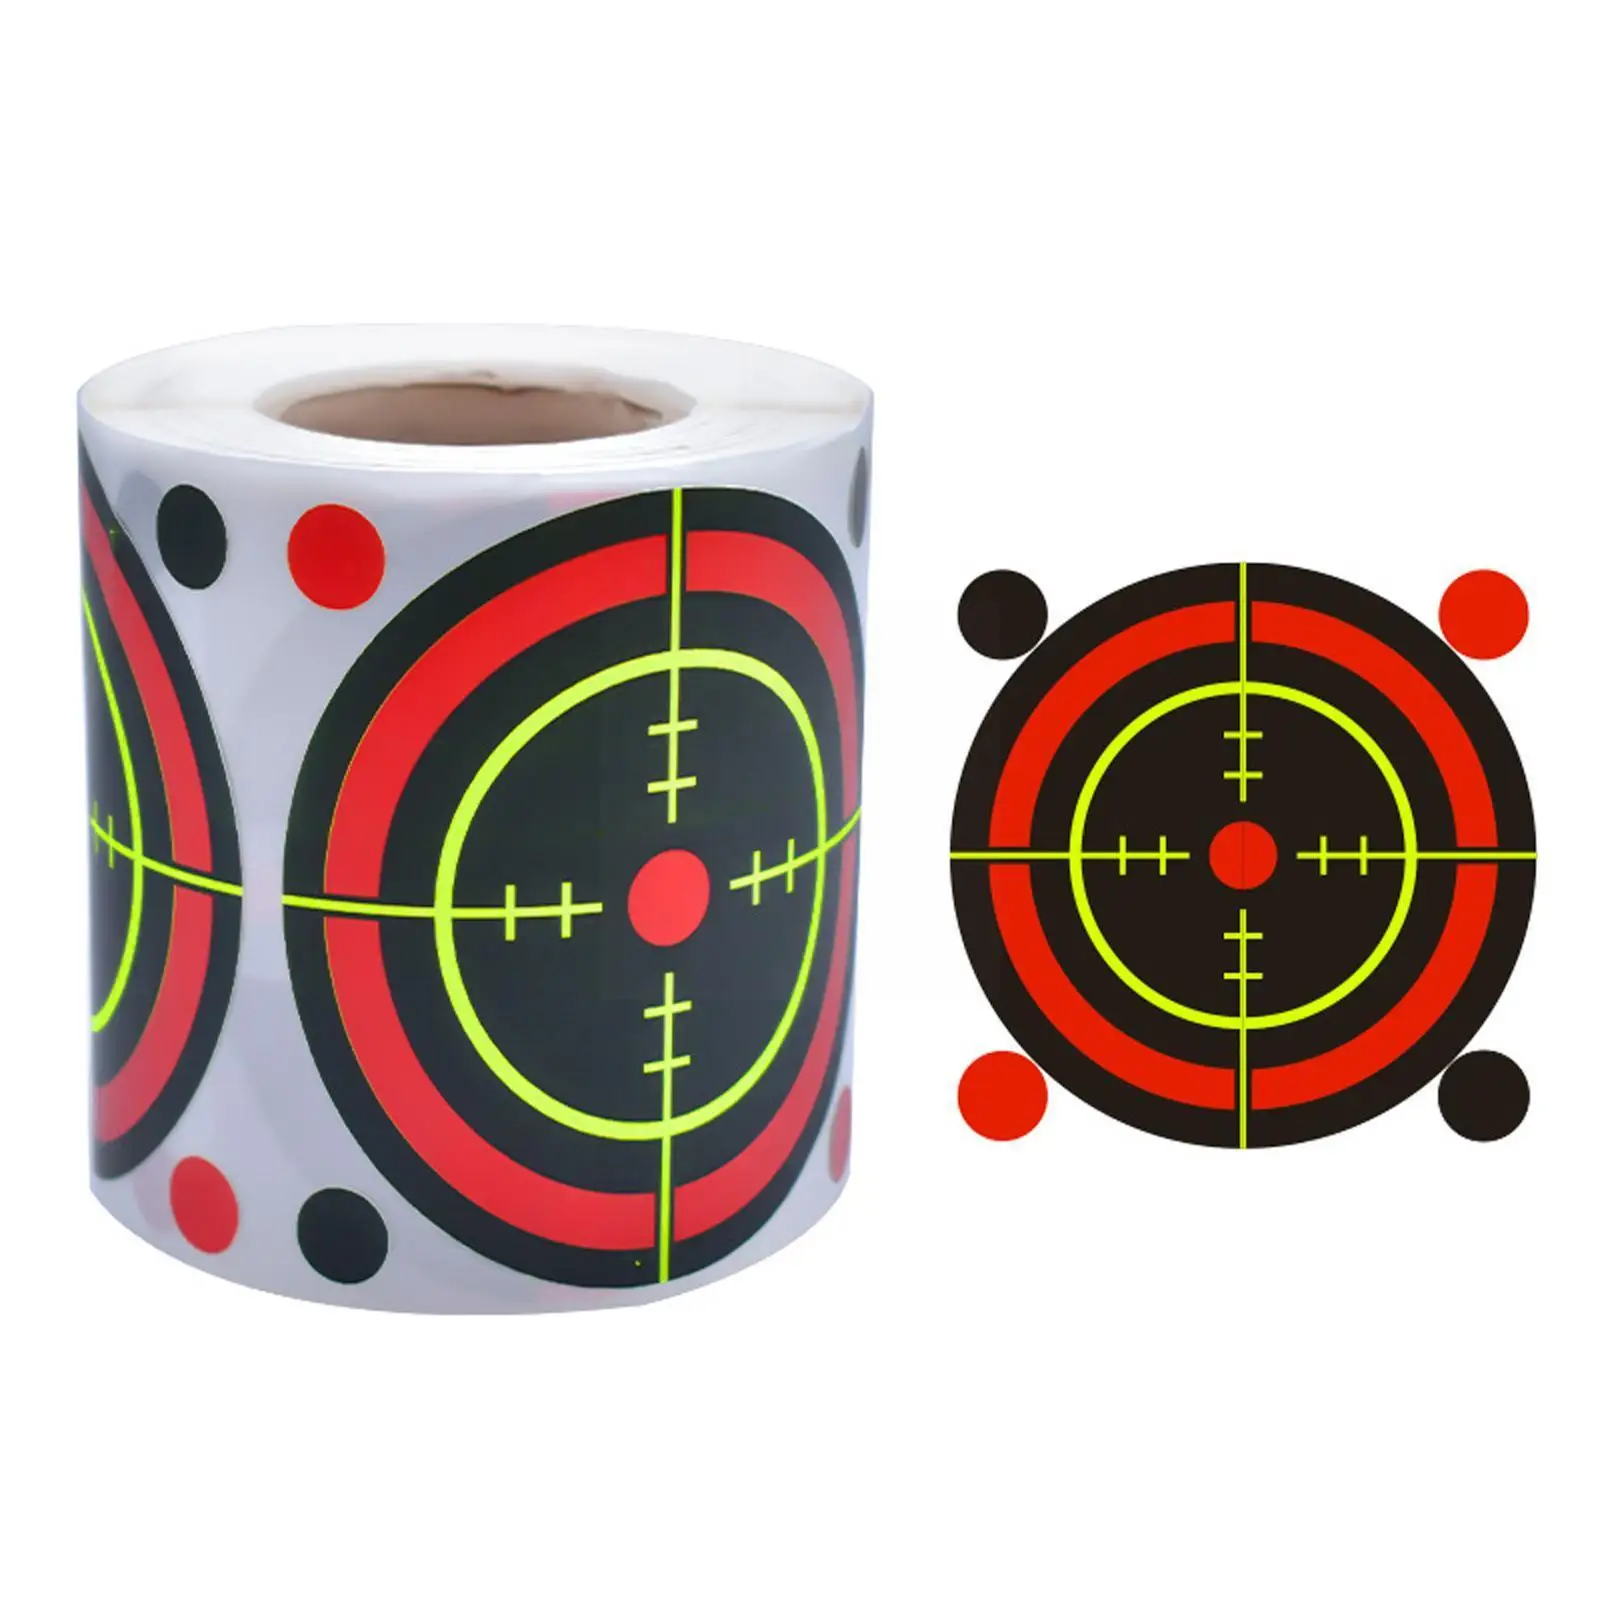 

Shooting Target Adhesive 200pcs/roll Shoot Targets Splatter Reactive Stickers For Archery Bow Hunting Practice Training Tar V2k3